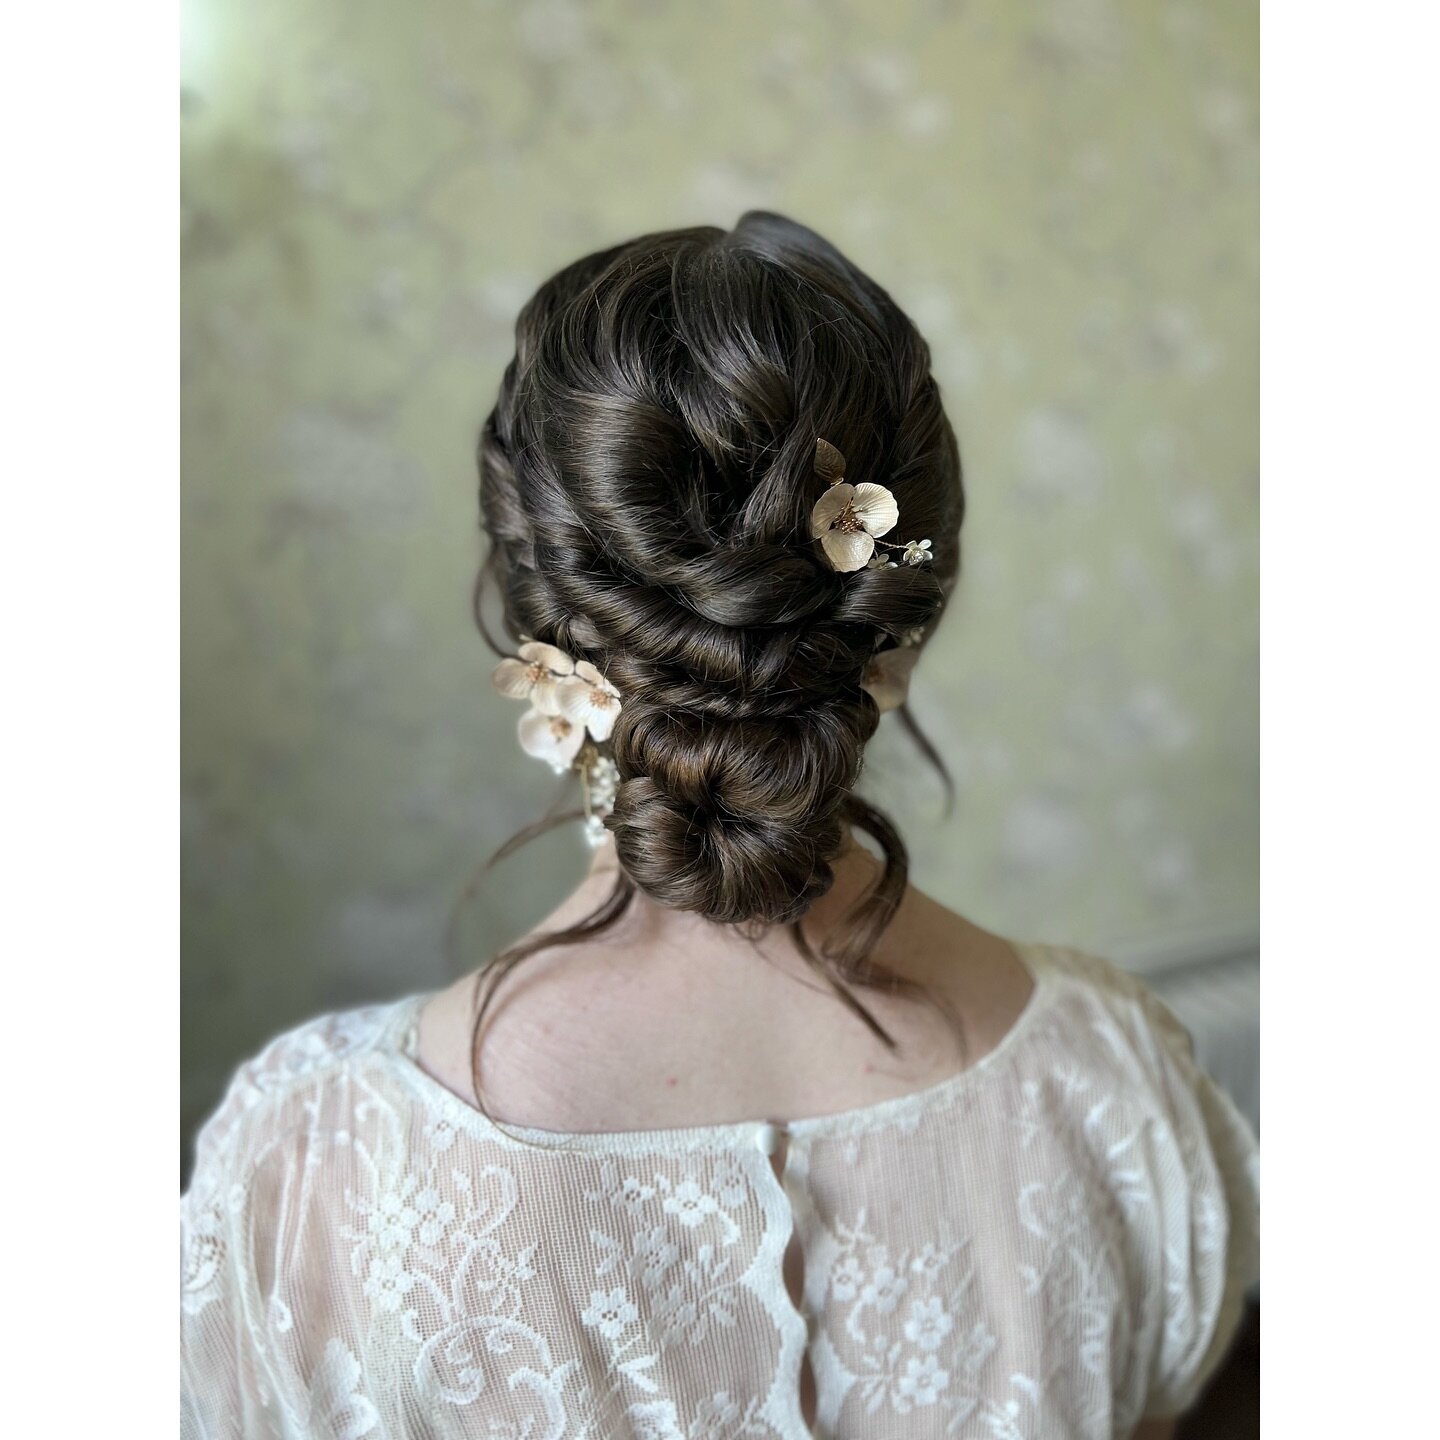 Boho hair do for the absolute beauty that is Elizabeth 🤍
Soft and whispy updo that paired so well with @indiebride.london dress and @poppyandmeadow hair accessories. 

Using @kykhaircare @ghdhair @fudgehair 

#updo #boho #bohohair #bohochic #bohobri